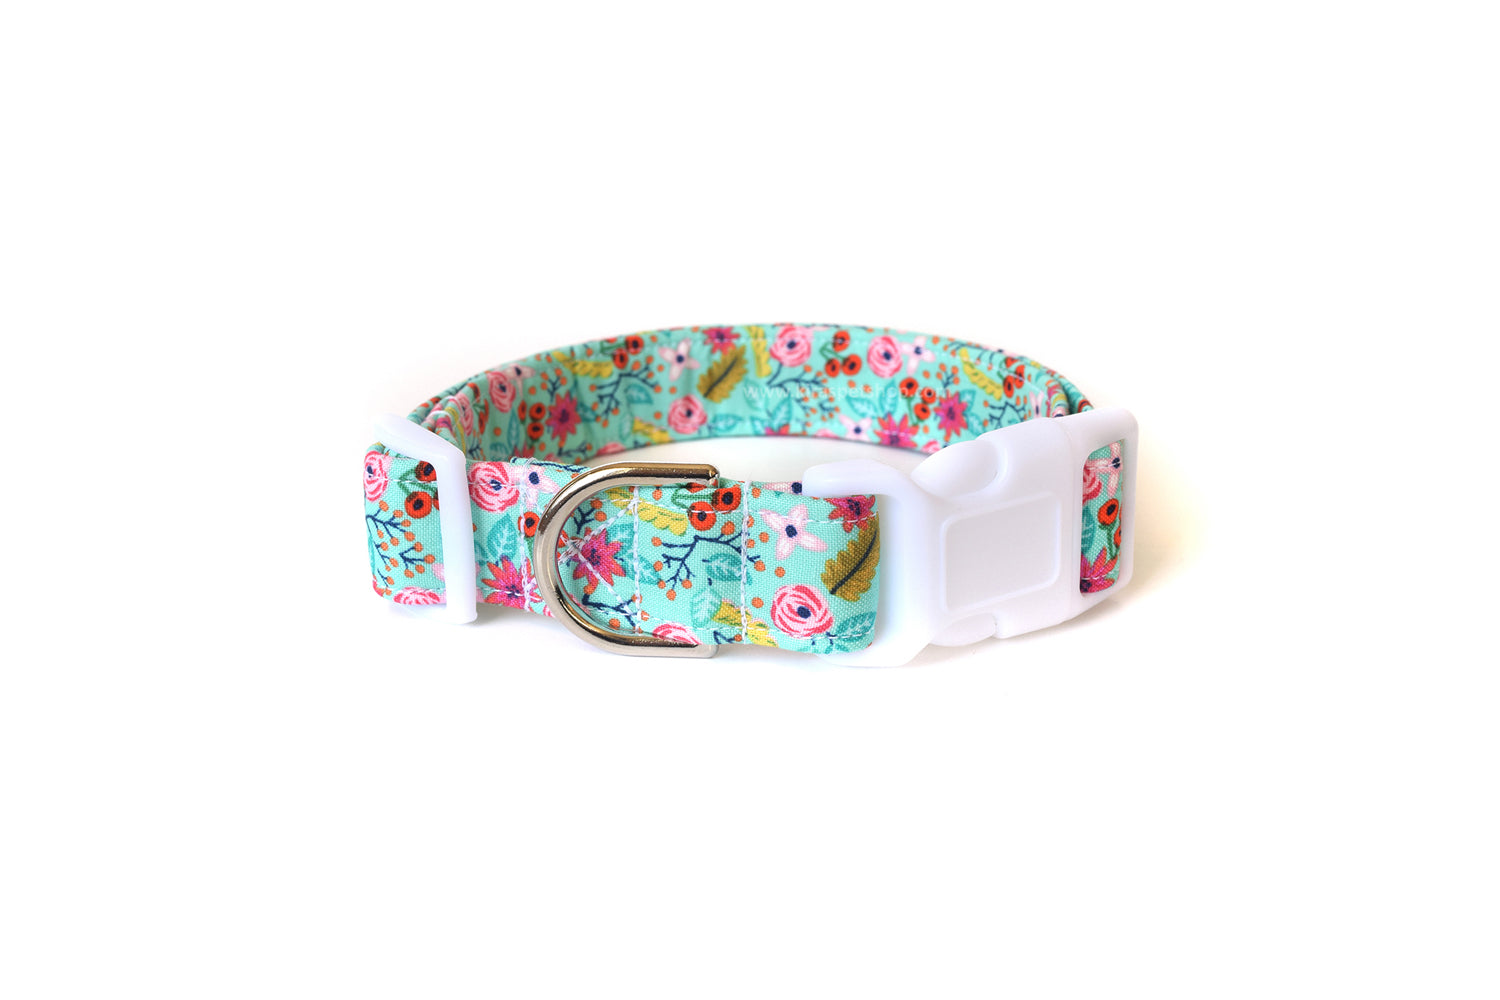 Turquoise Multicolor Floral Dog Collar - Handmade by Kira's Pet Shop